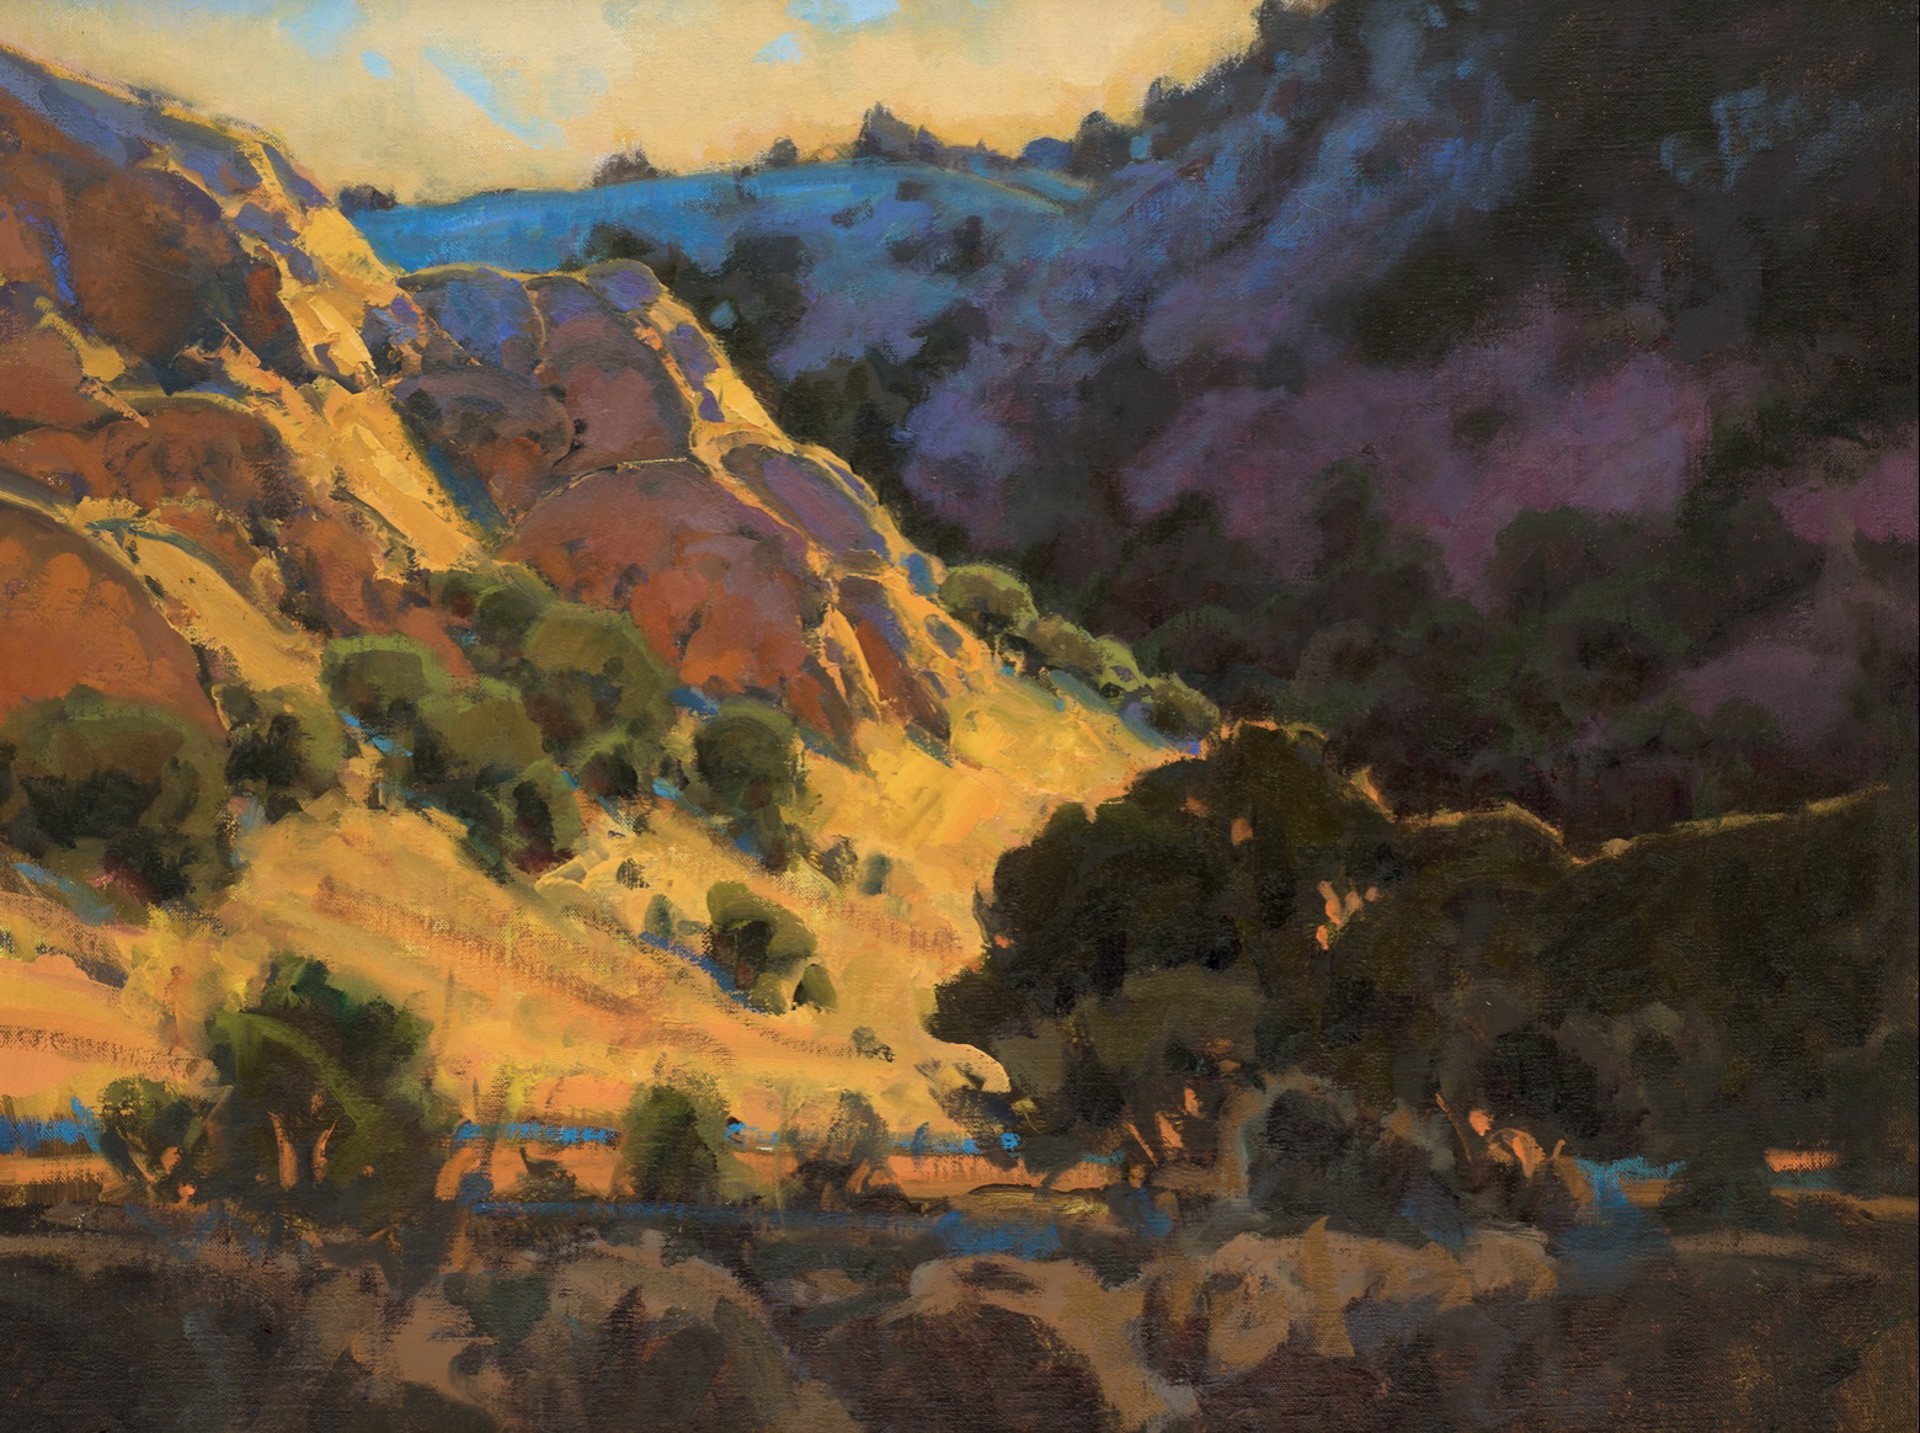 Evening Color in the Canyon by Bill Gallen